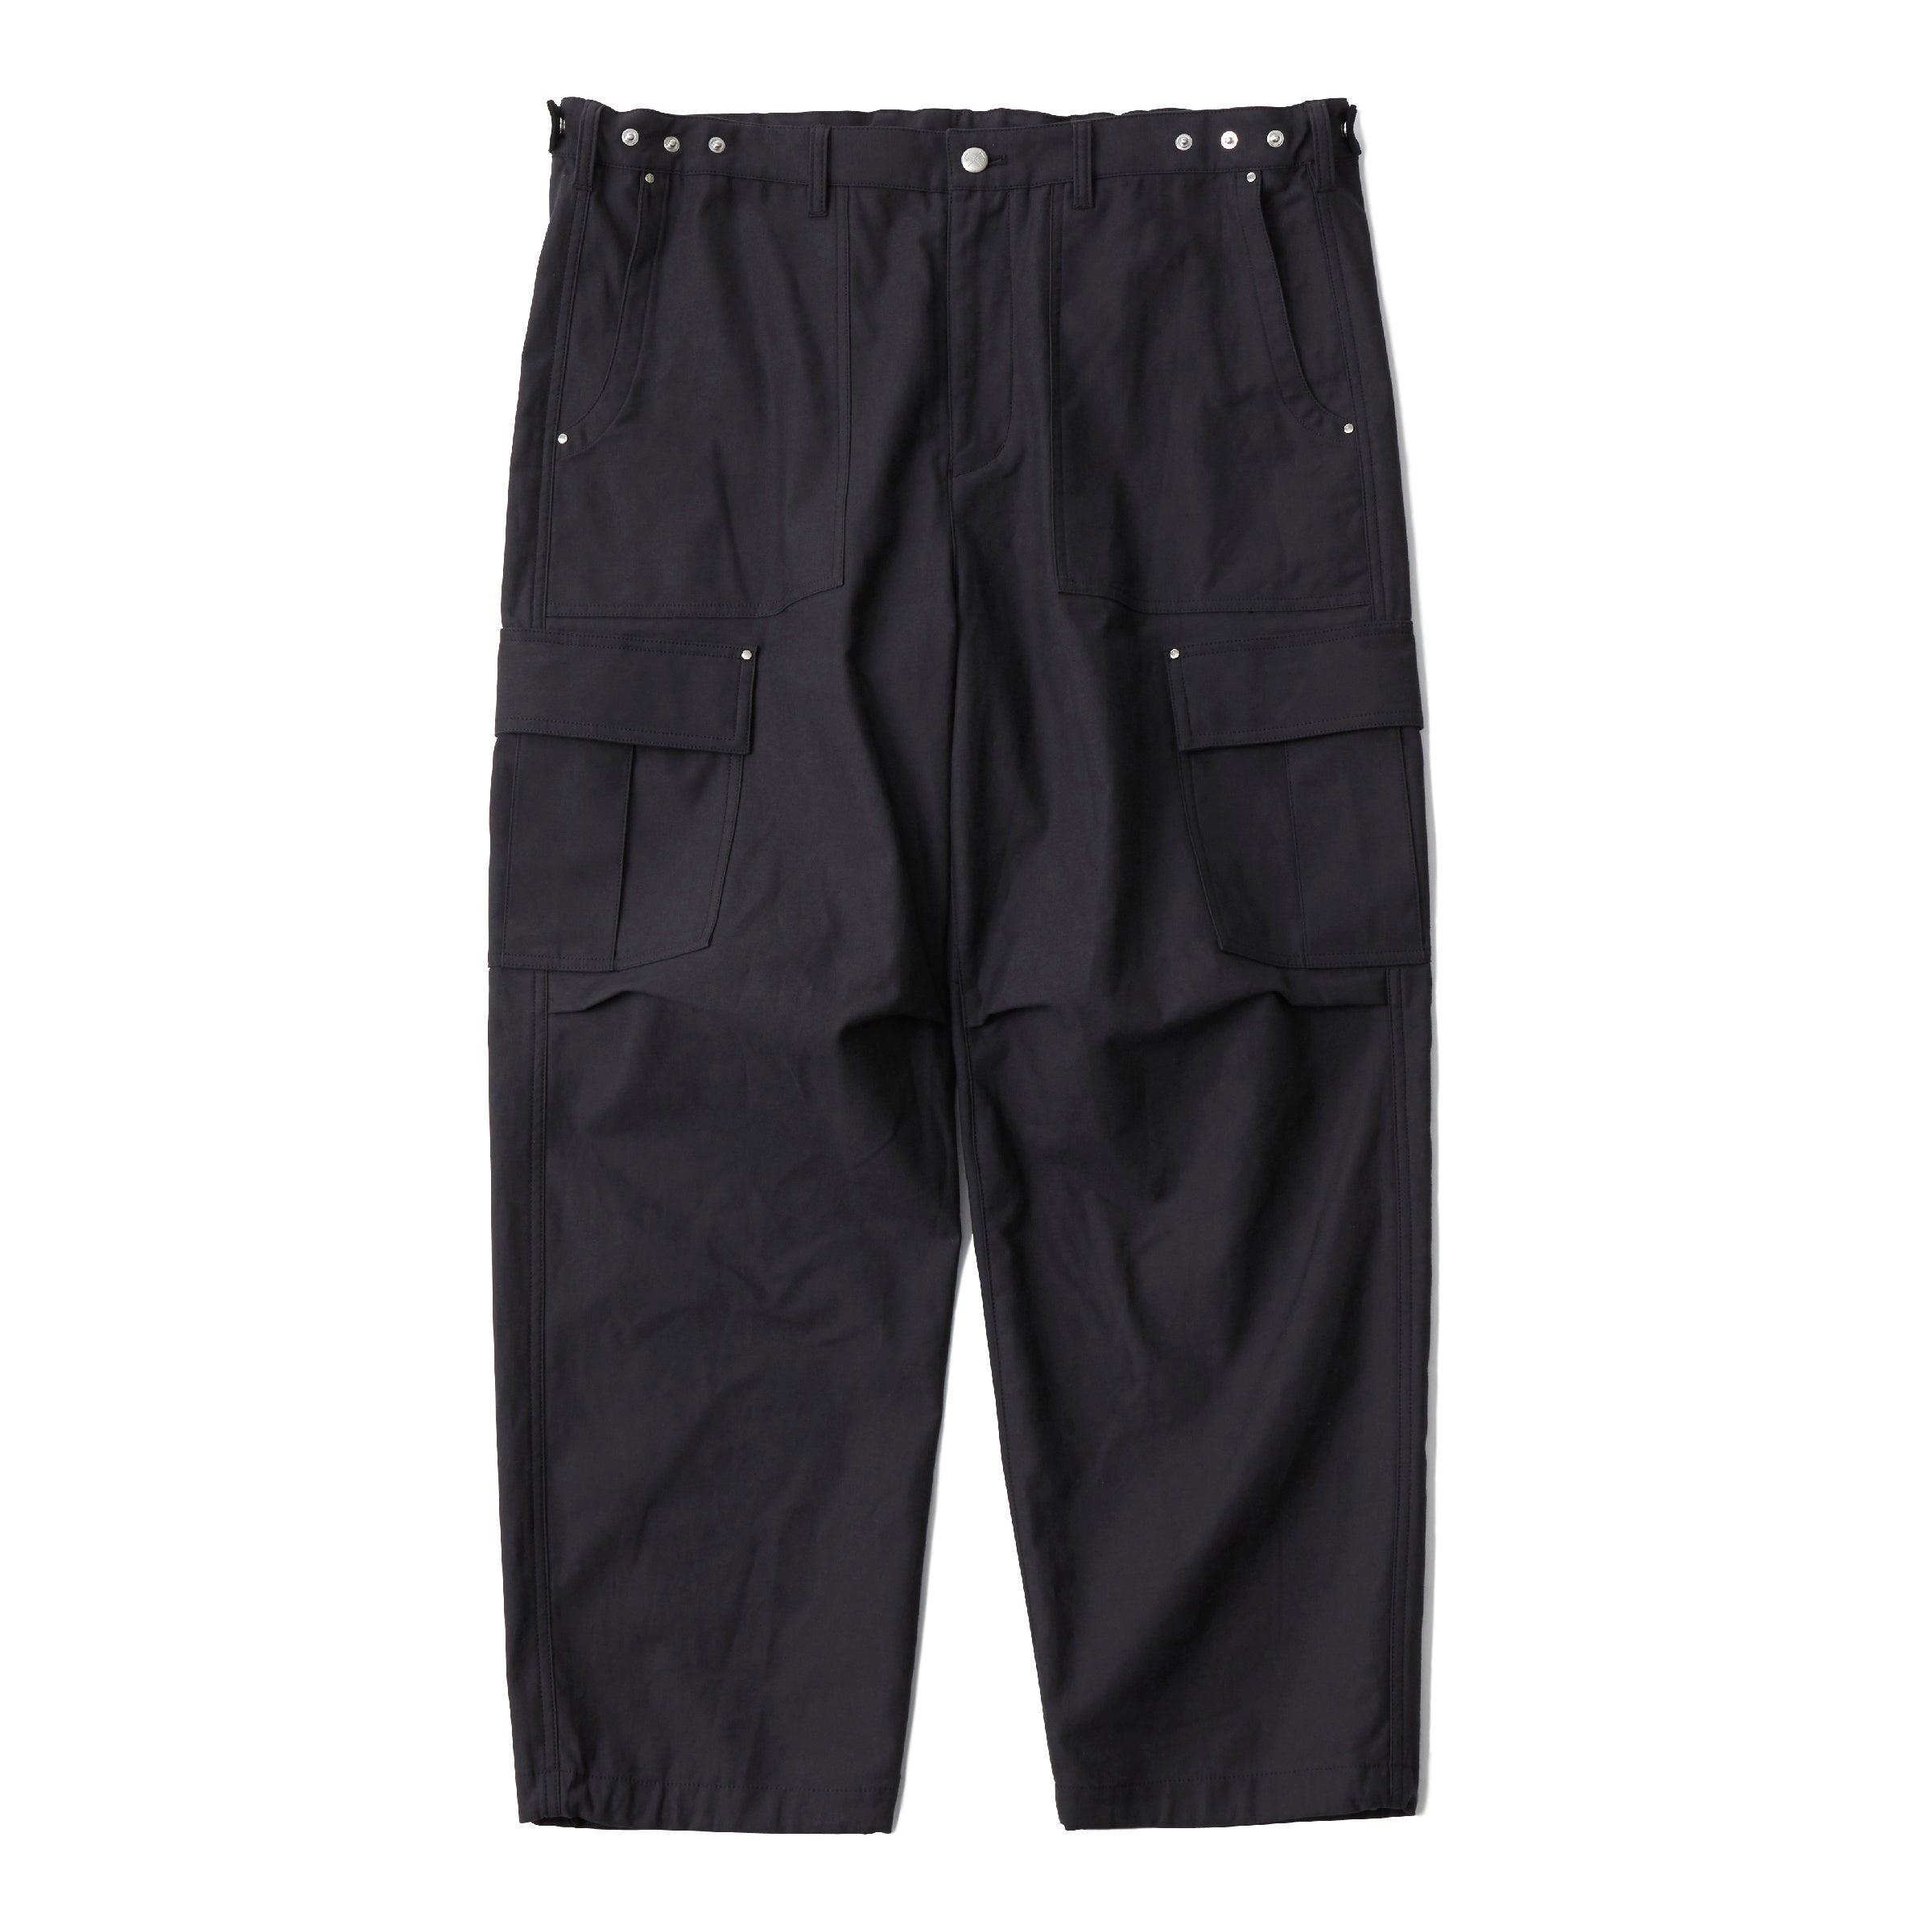 BACK SATIN FIELD PANTS – White Mountaineering OFFICIAL WEB SITE.